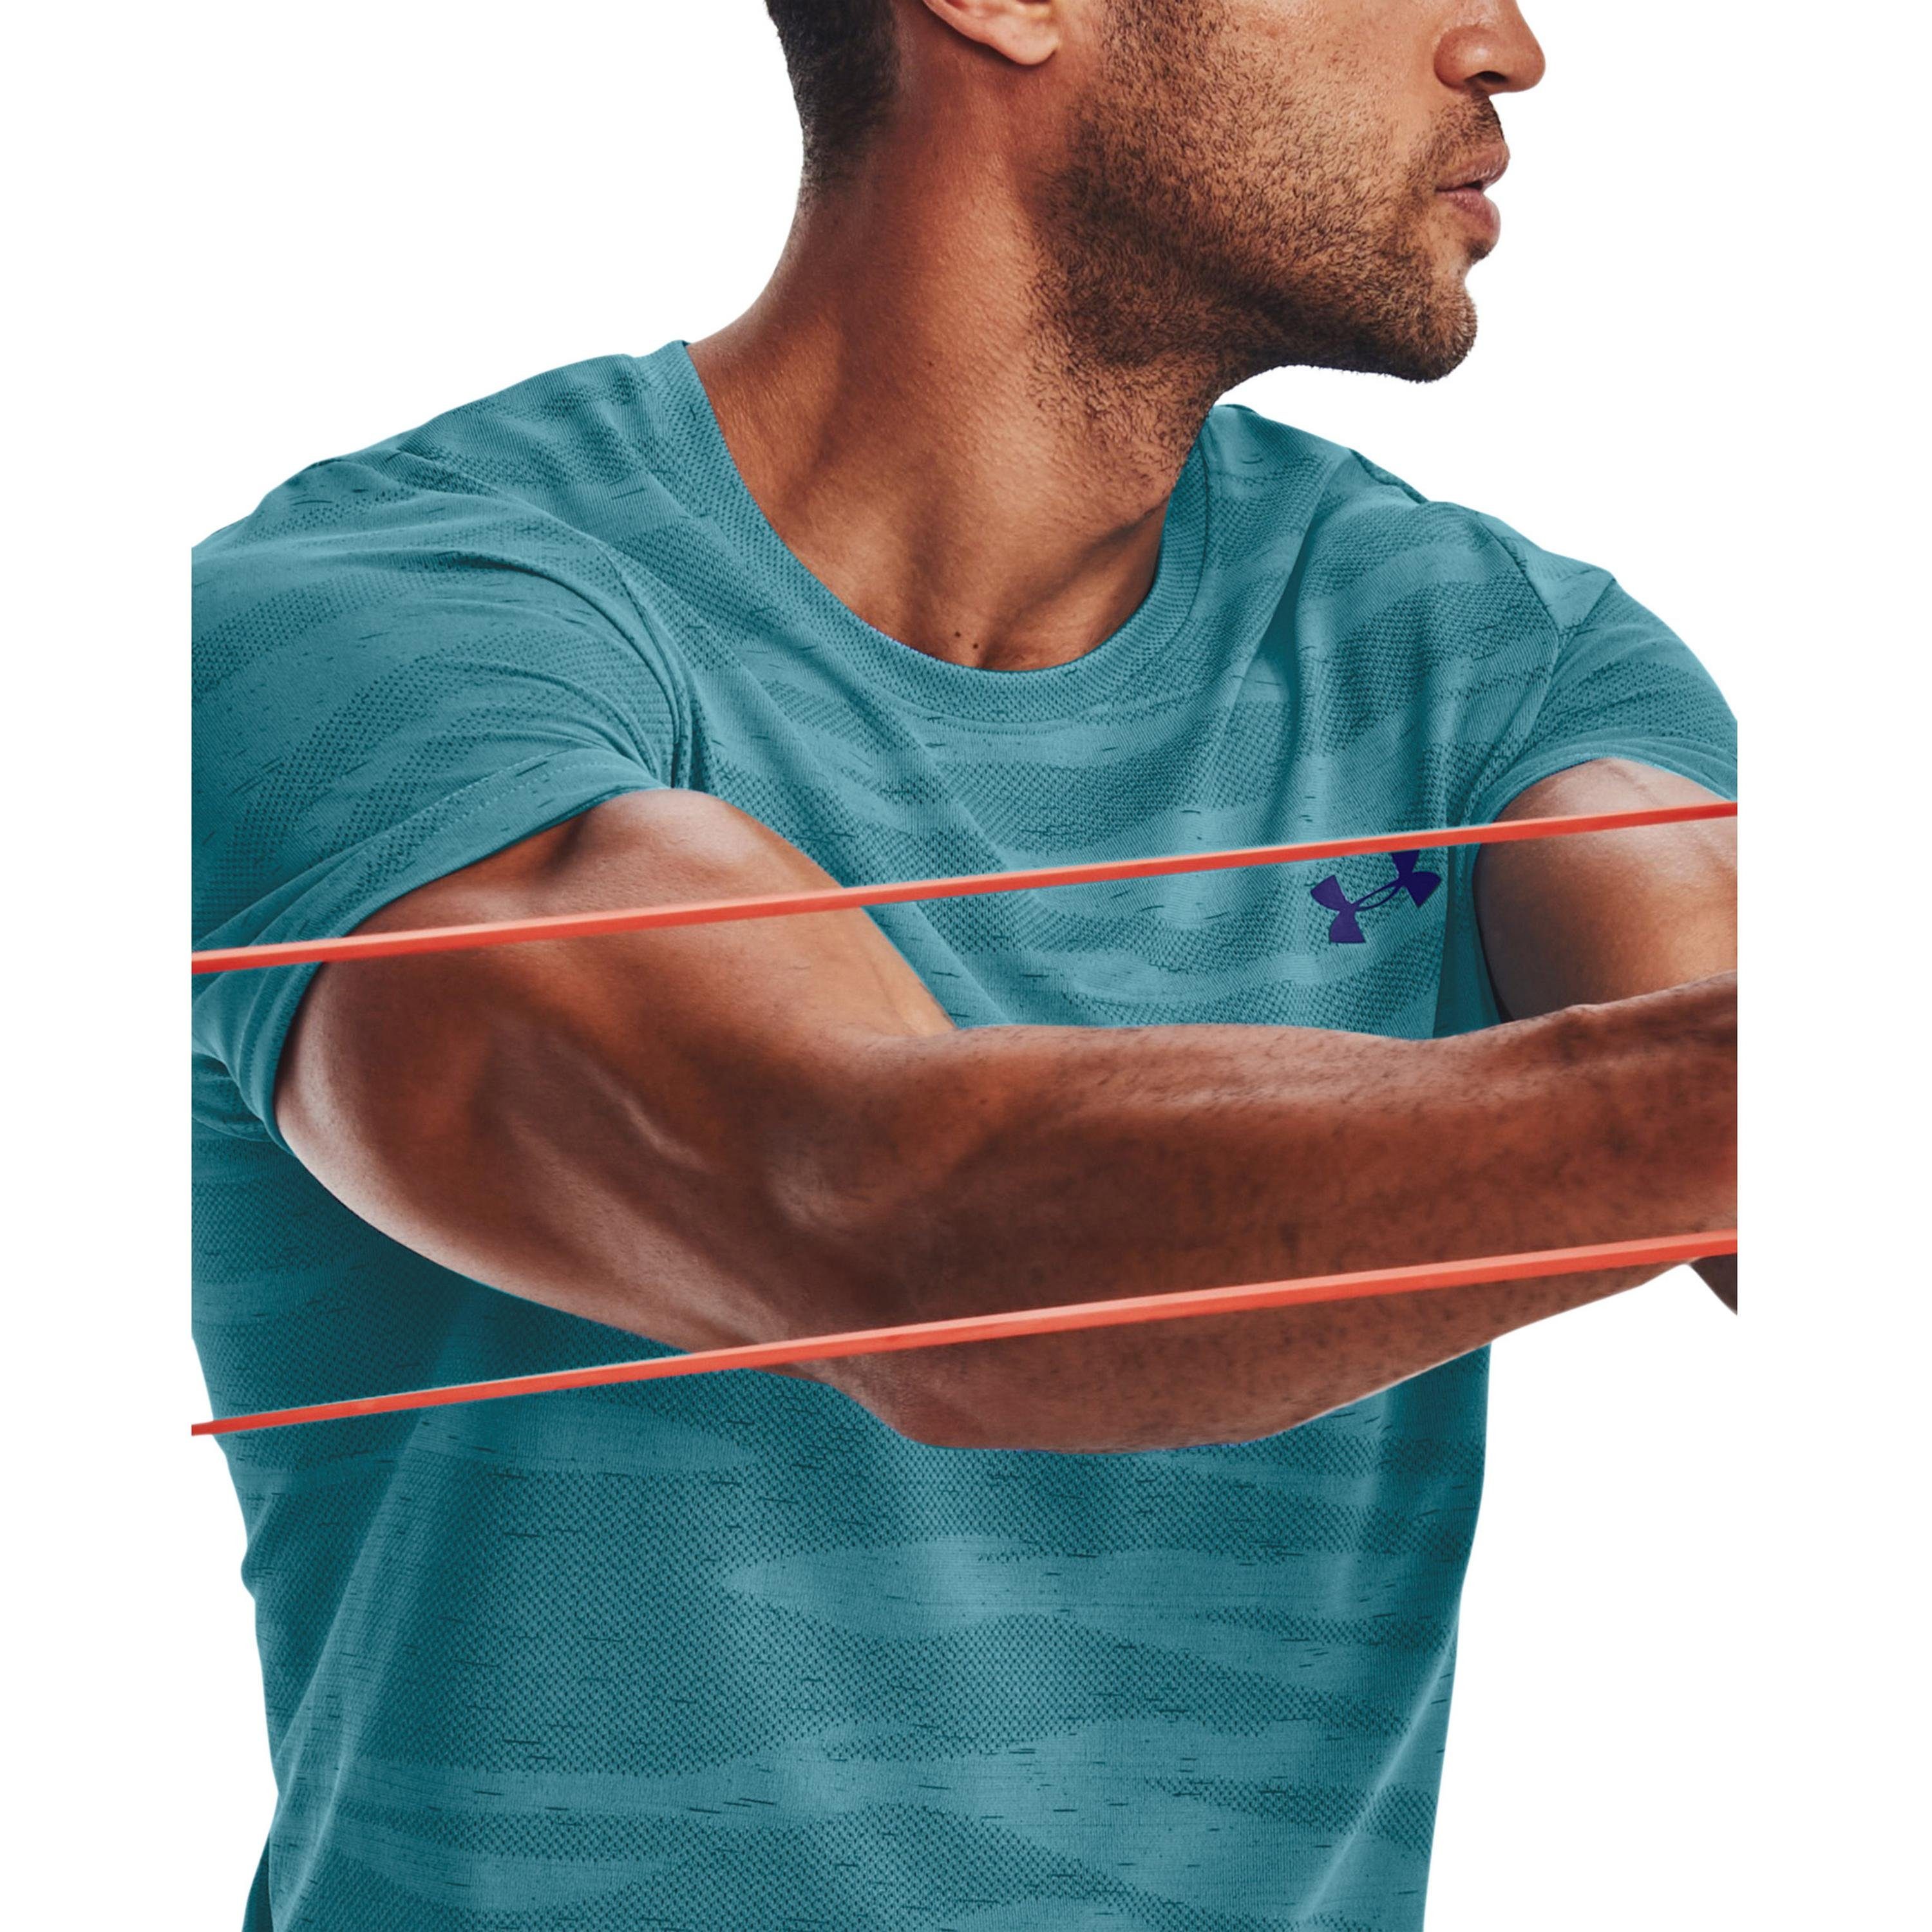 Funktionsshirt glacierblue-sonarblue Seamless Under Armour®